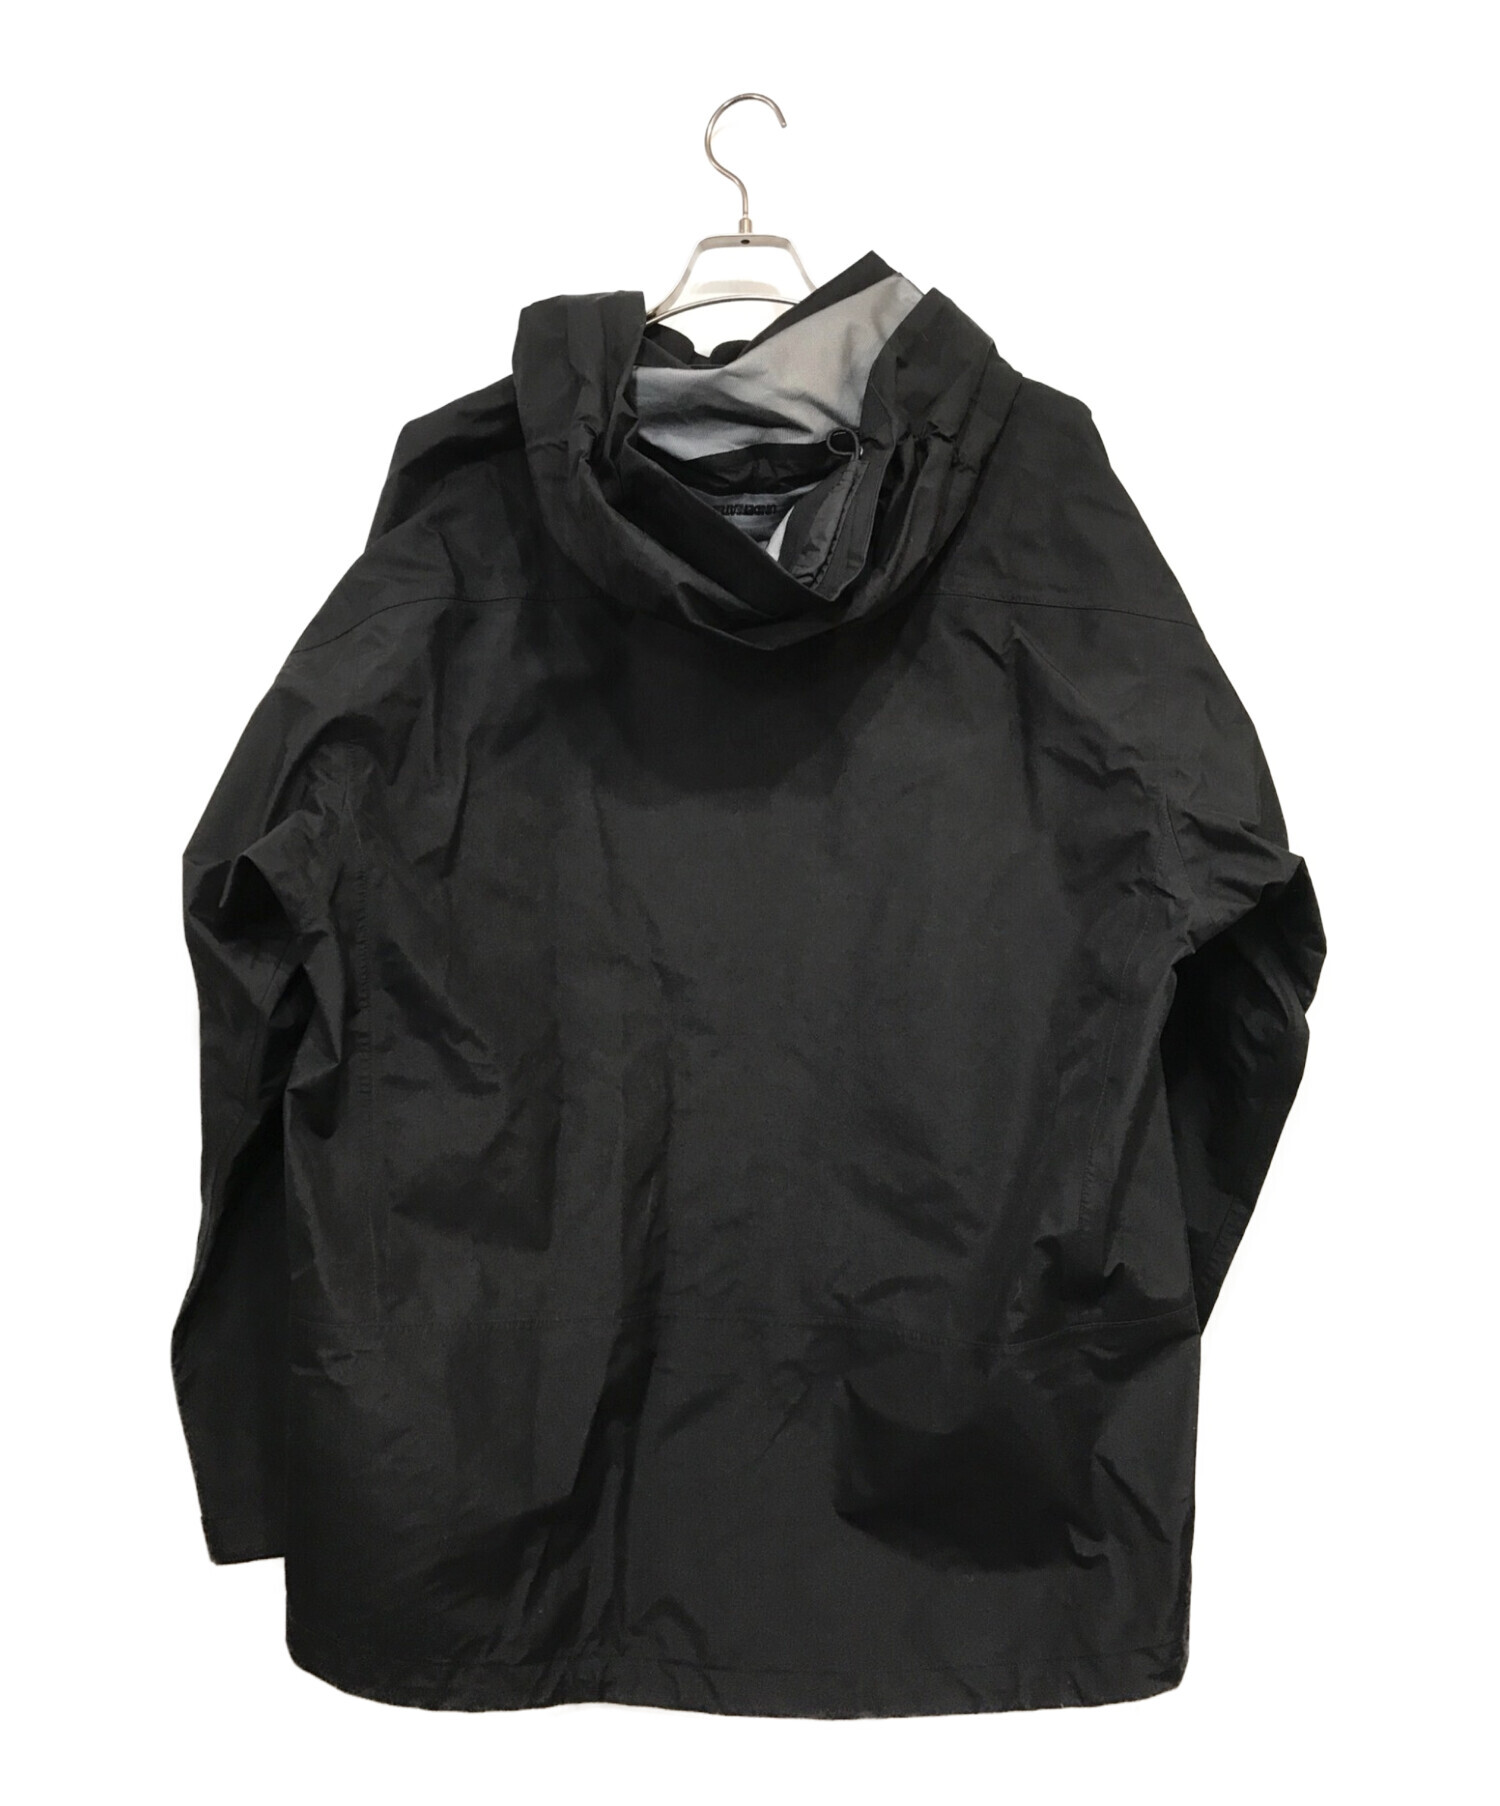 UNDEFEATED (アンディフィーテッド) UNDEFEATED MOUNTAIN PARKA/マウンテンパーカー ブラック サイズ:XL